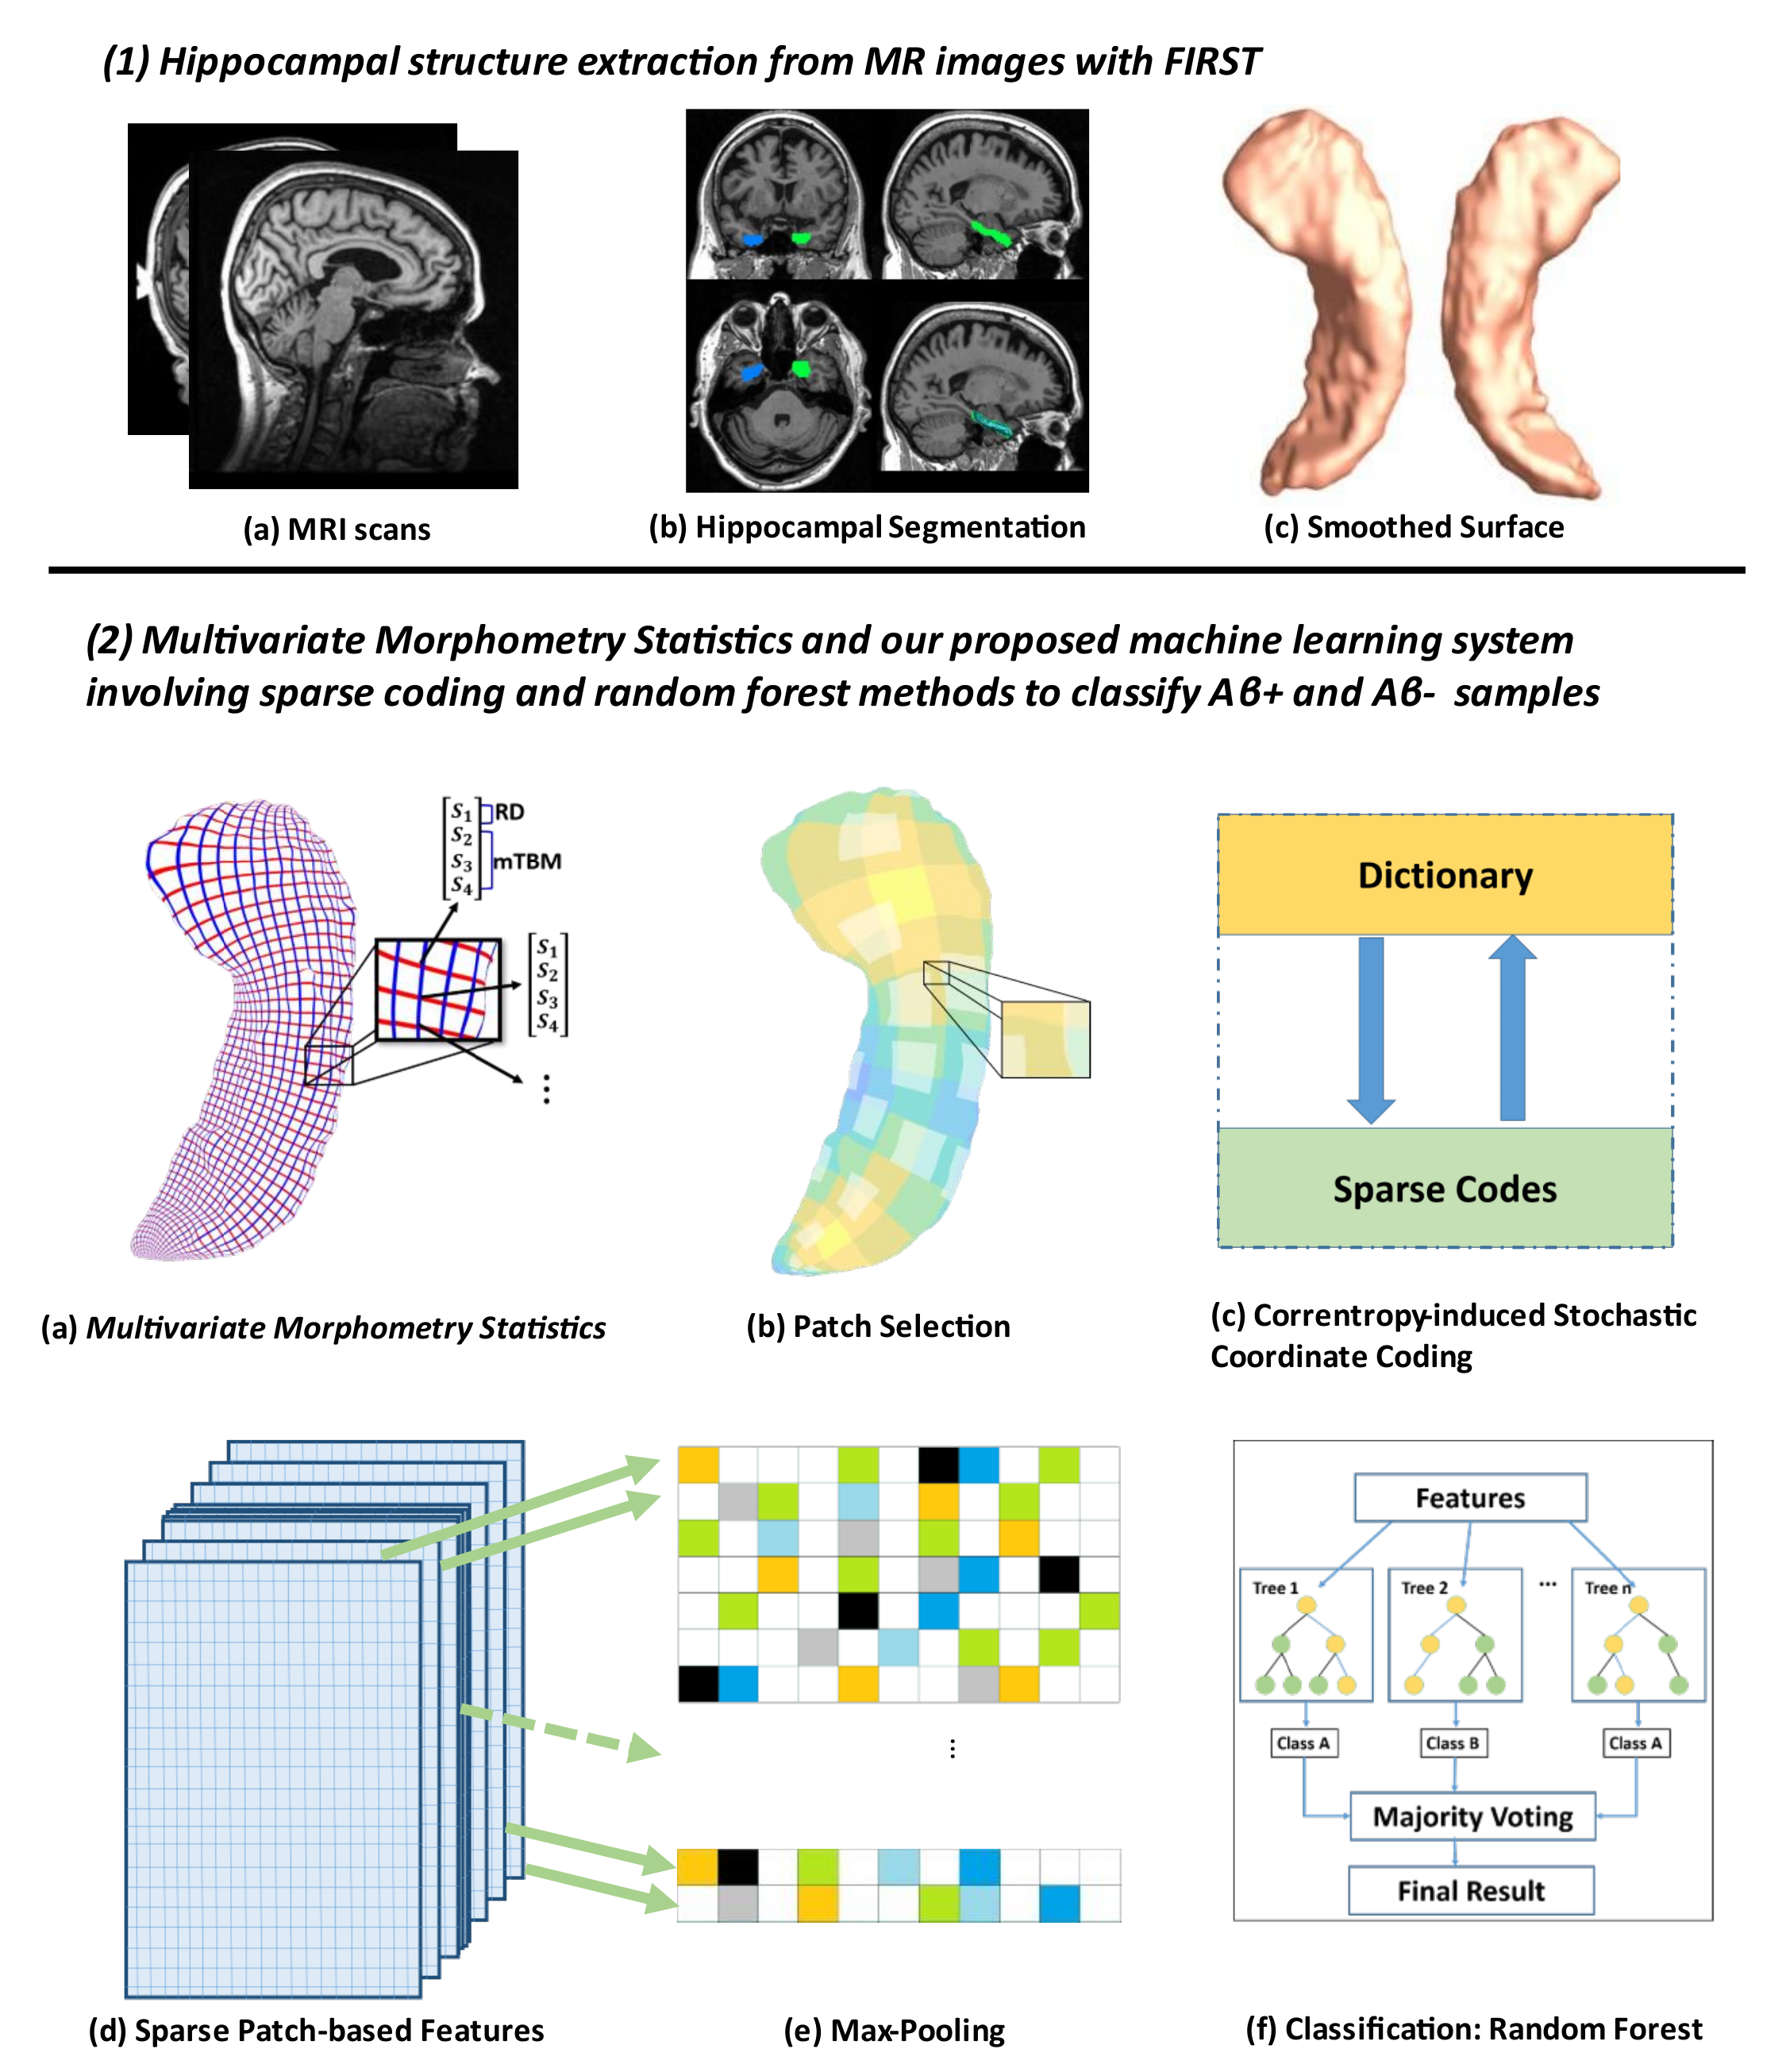 Predicting Brain Amyloid using Multivariate Morphometry Statistics, Sparse Coding, and Correntropy: Validation in 1,101 Individuals from the ADNI and OASIS Databases